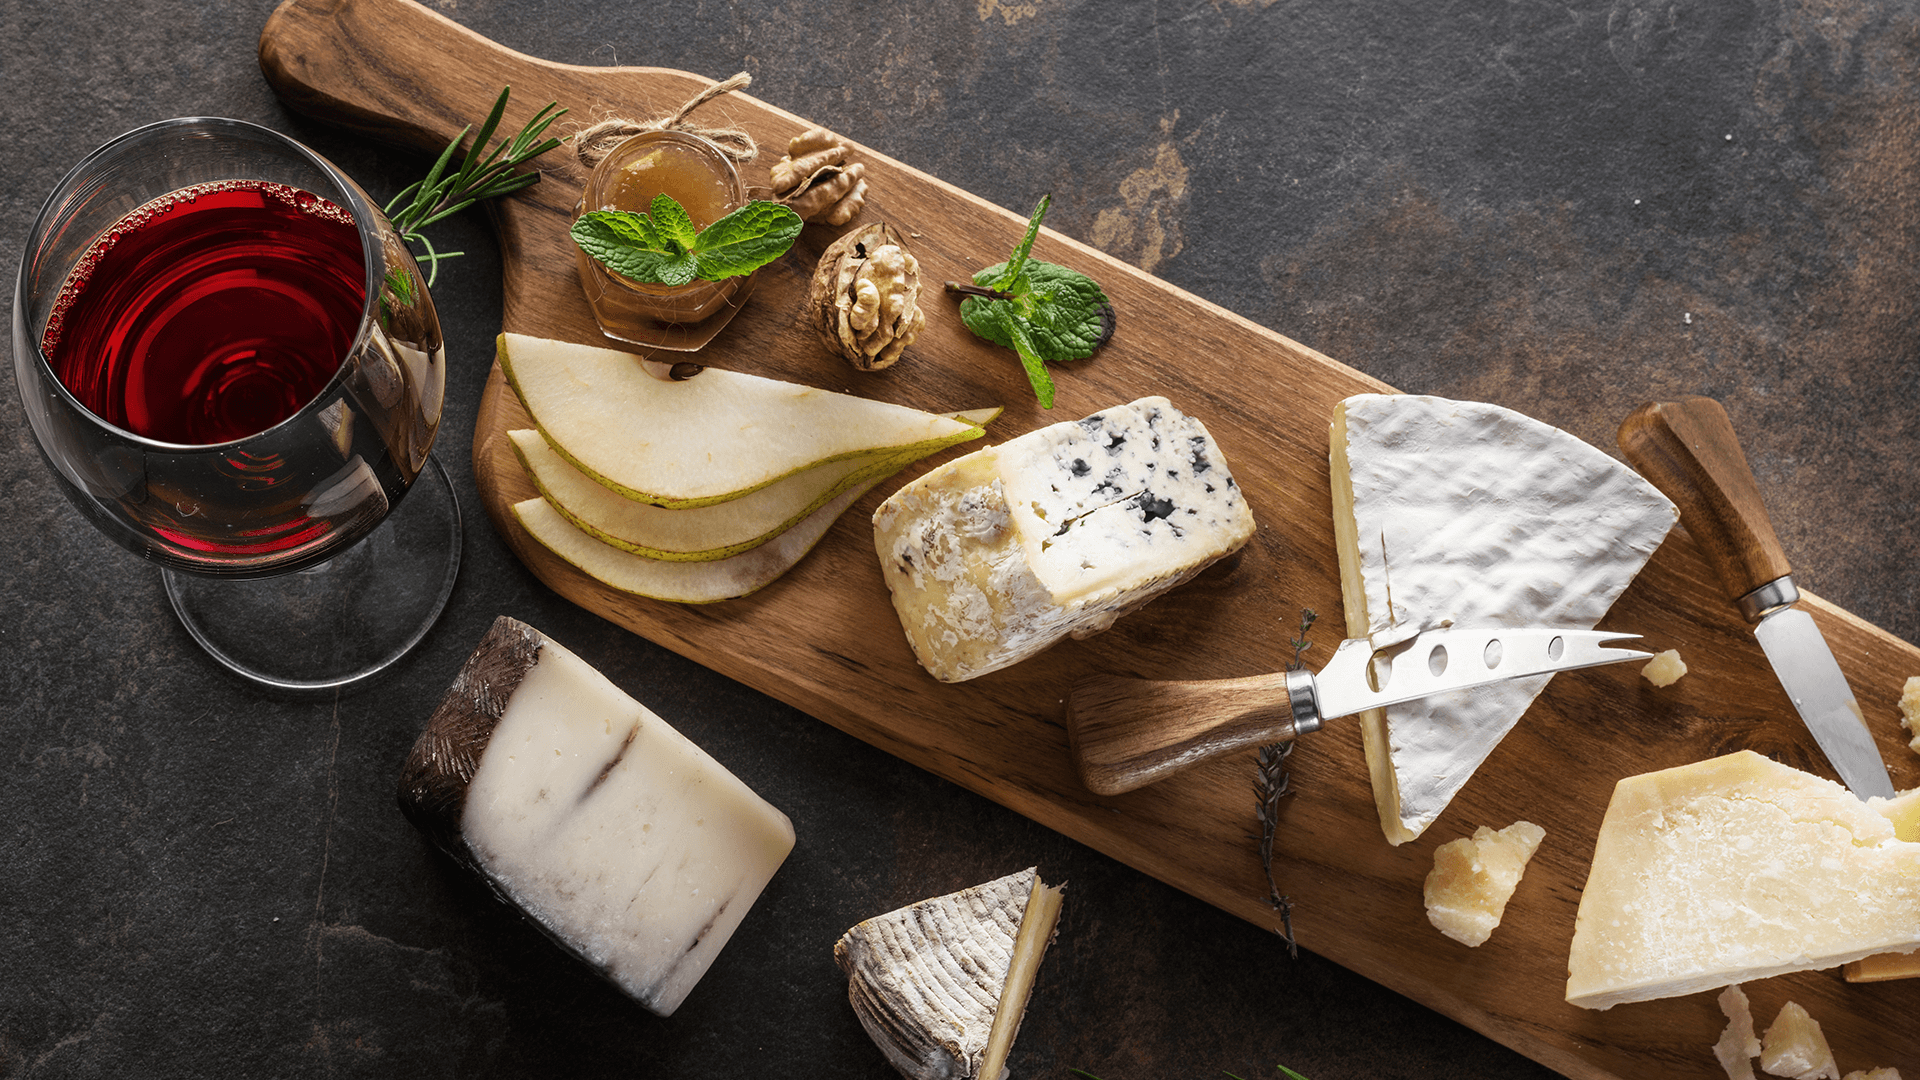 aged-cheese-board-with-glass-of-red-wine